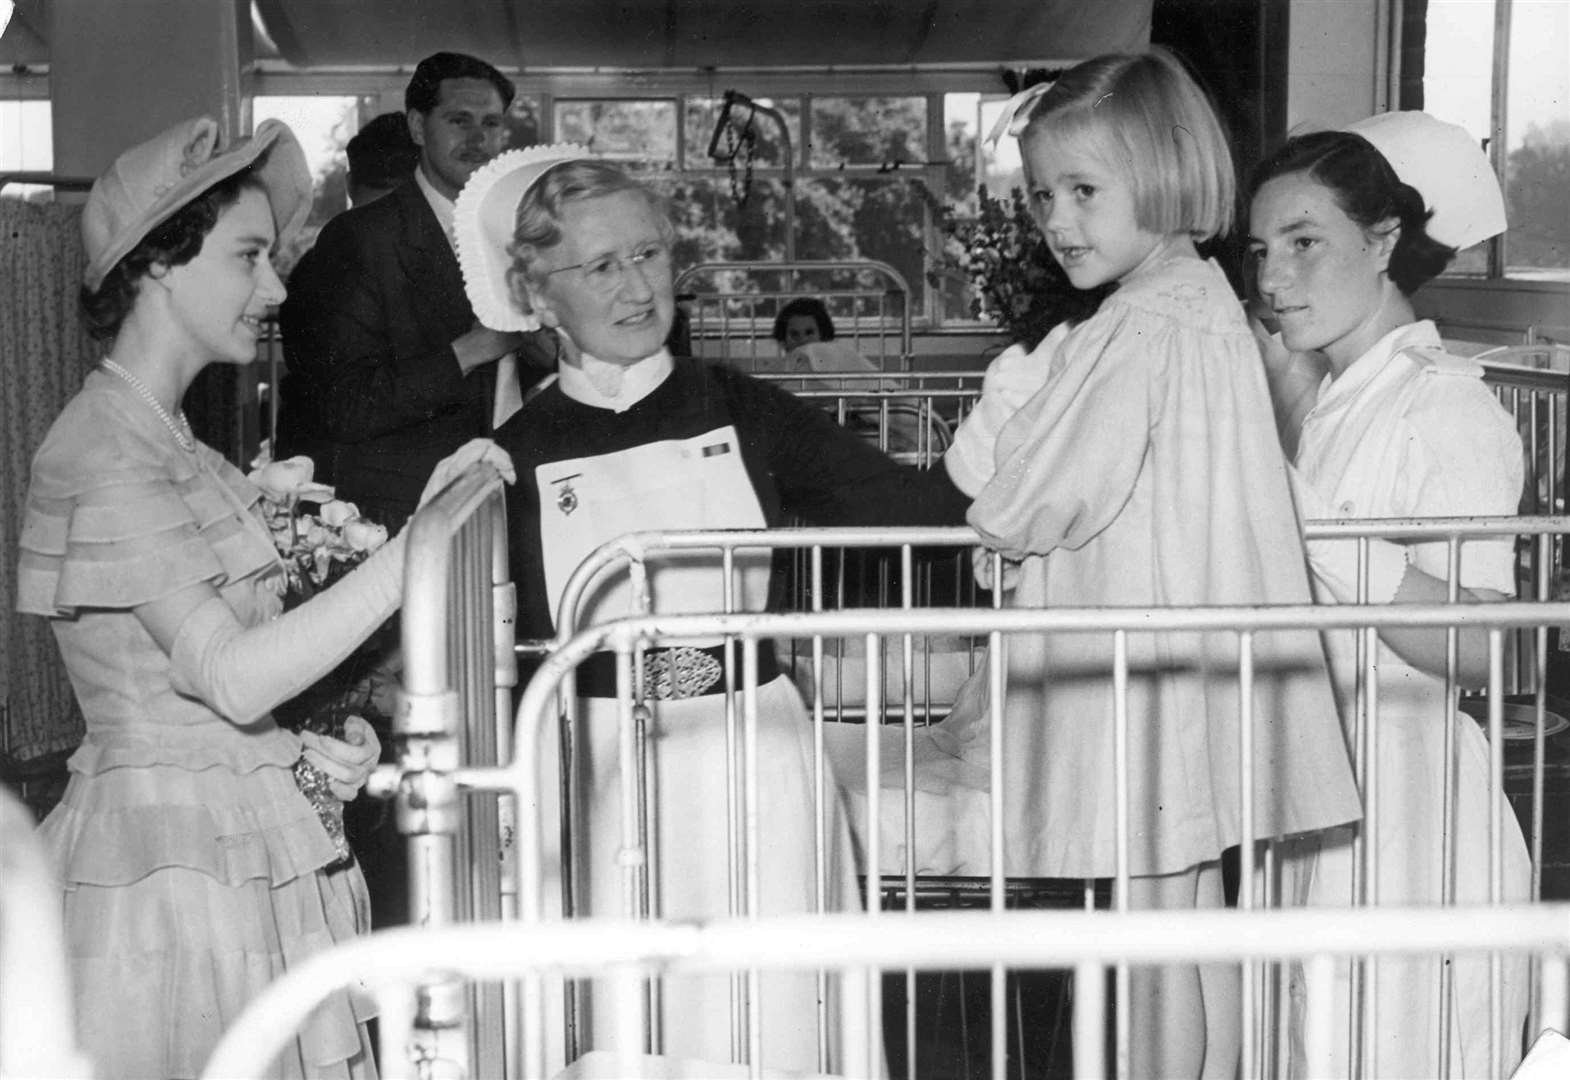 Monica Ellenden, three, had a royal visitor while she was a patient at the Royal Victoria Hospital, Folkestone, in July 1952. Princess Margaret toured children's wards, medical and surgical wards and a new wing built to replace one destroyed by German shellfire during the war. She later had tea at the Leas Cliff Hall